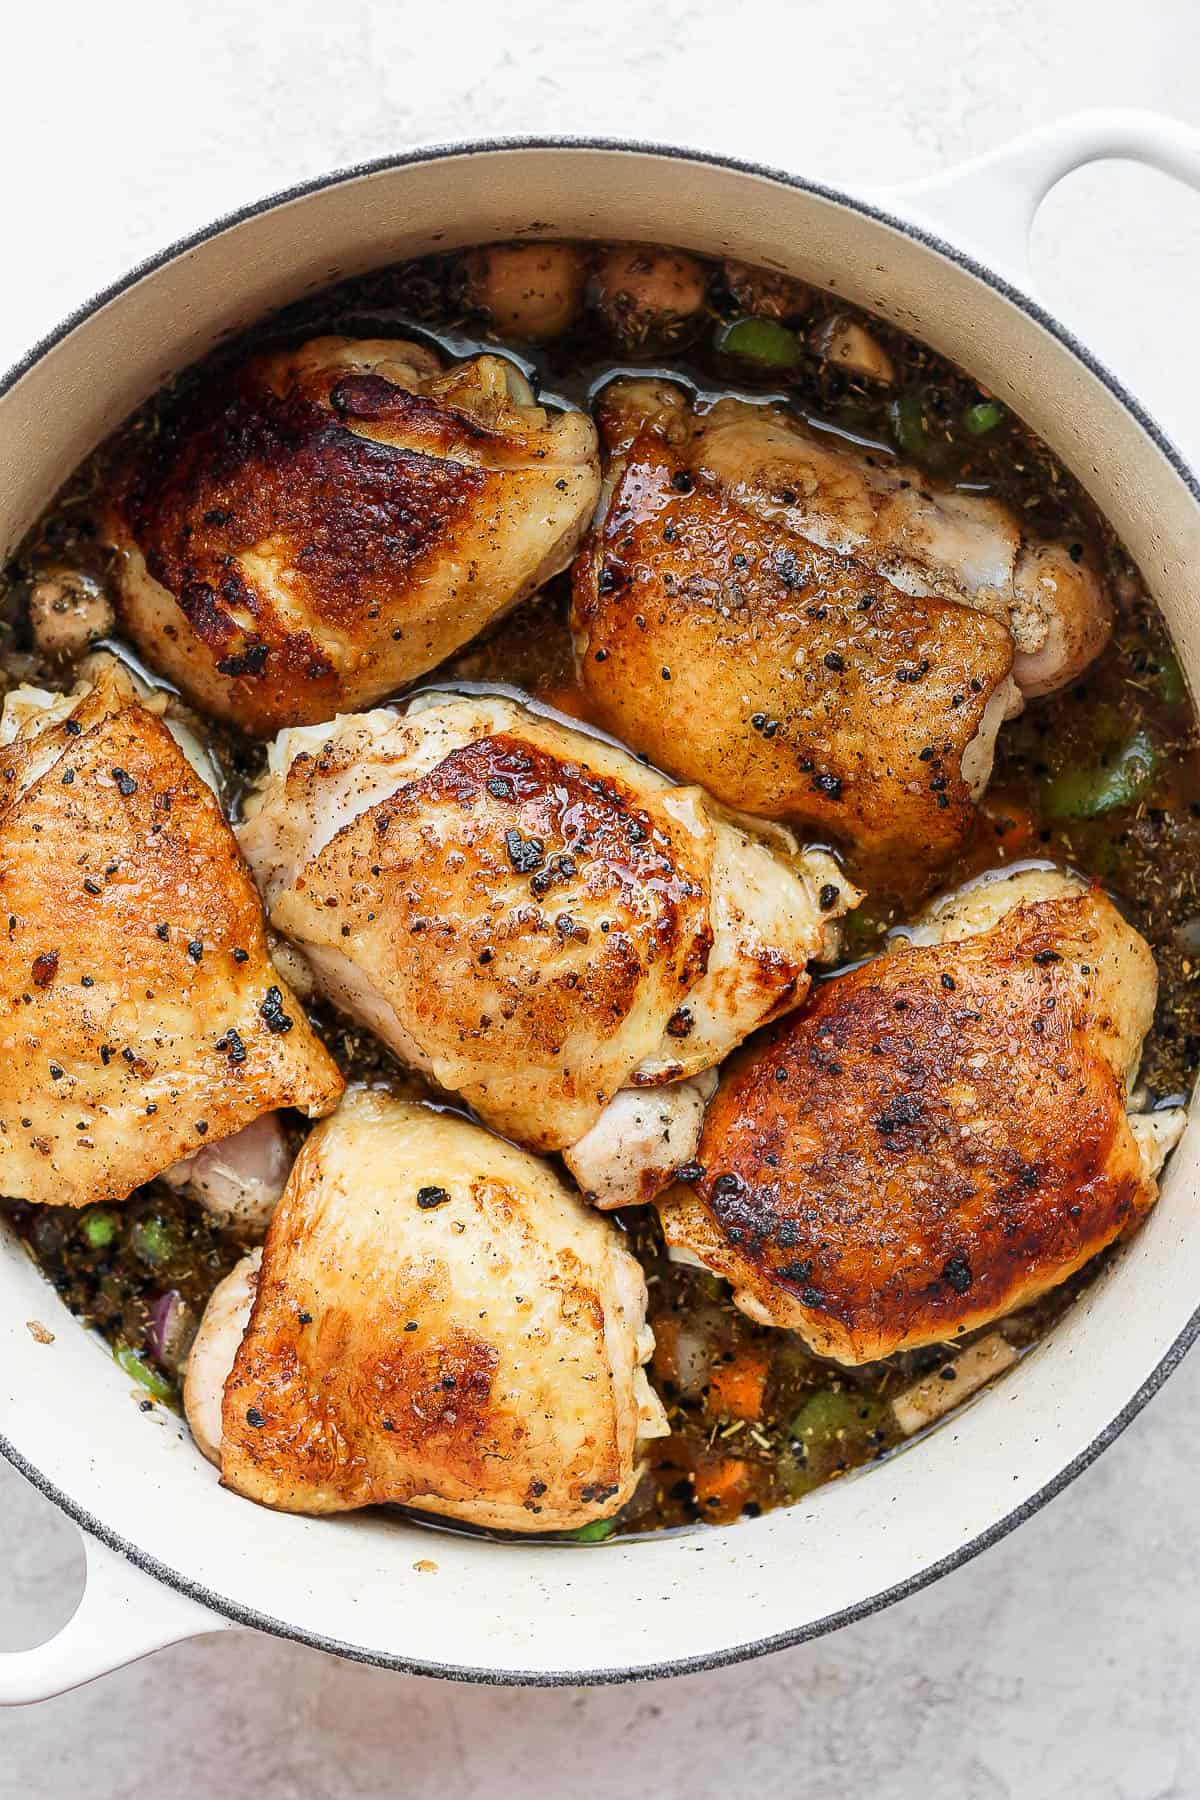 Baked chicken and rice in a dutch oven before baking.